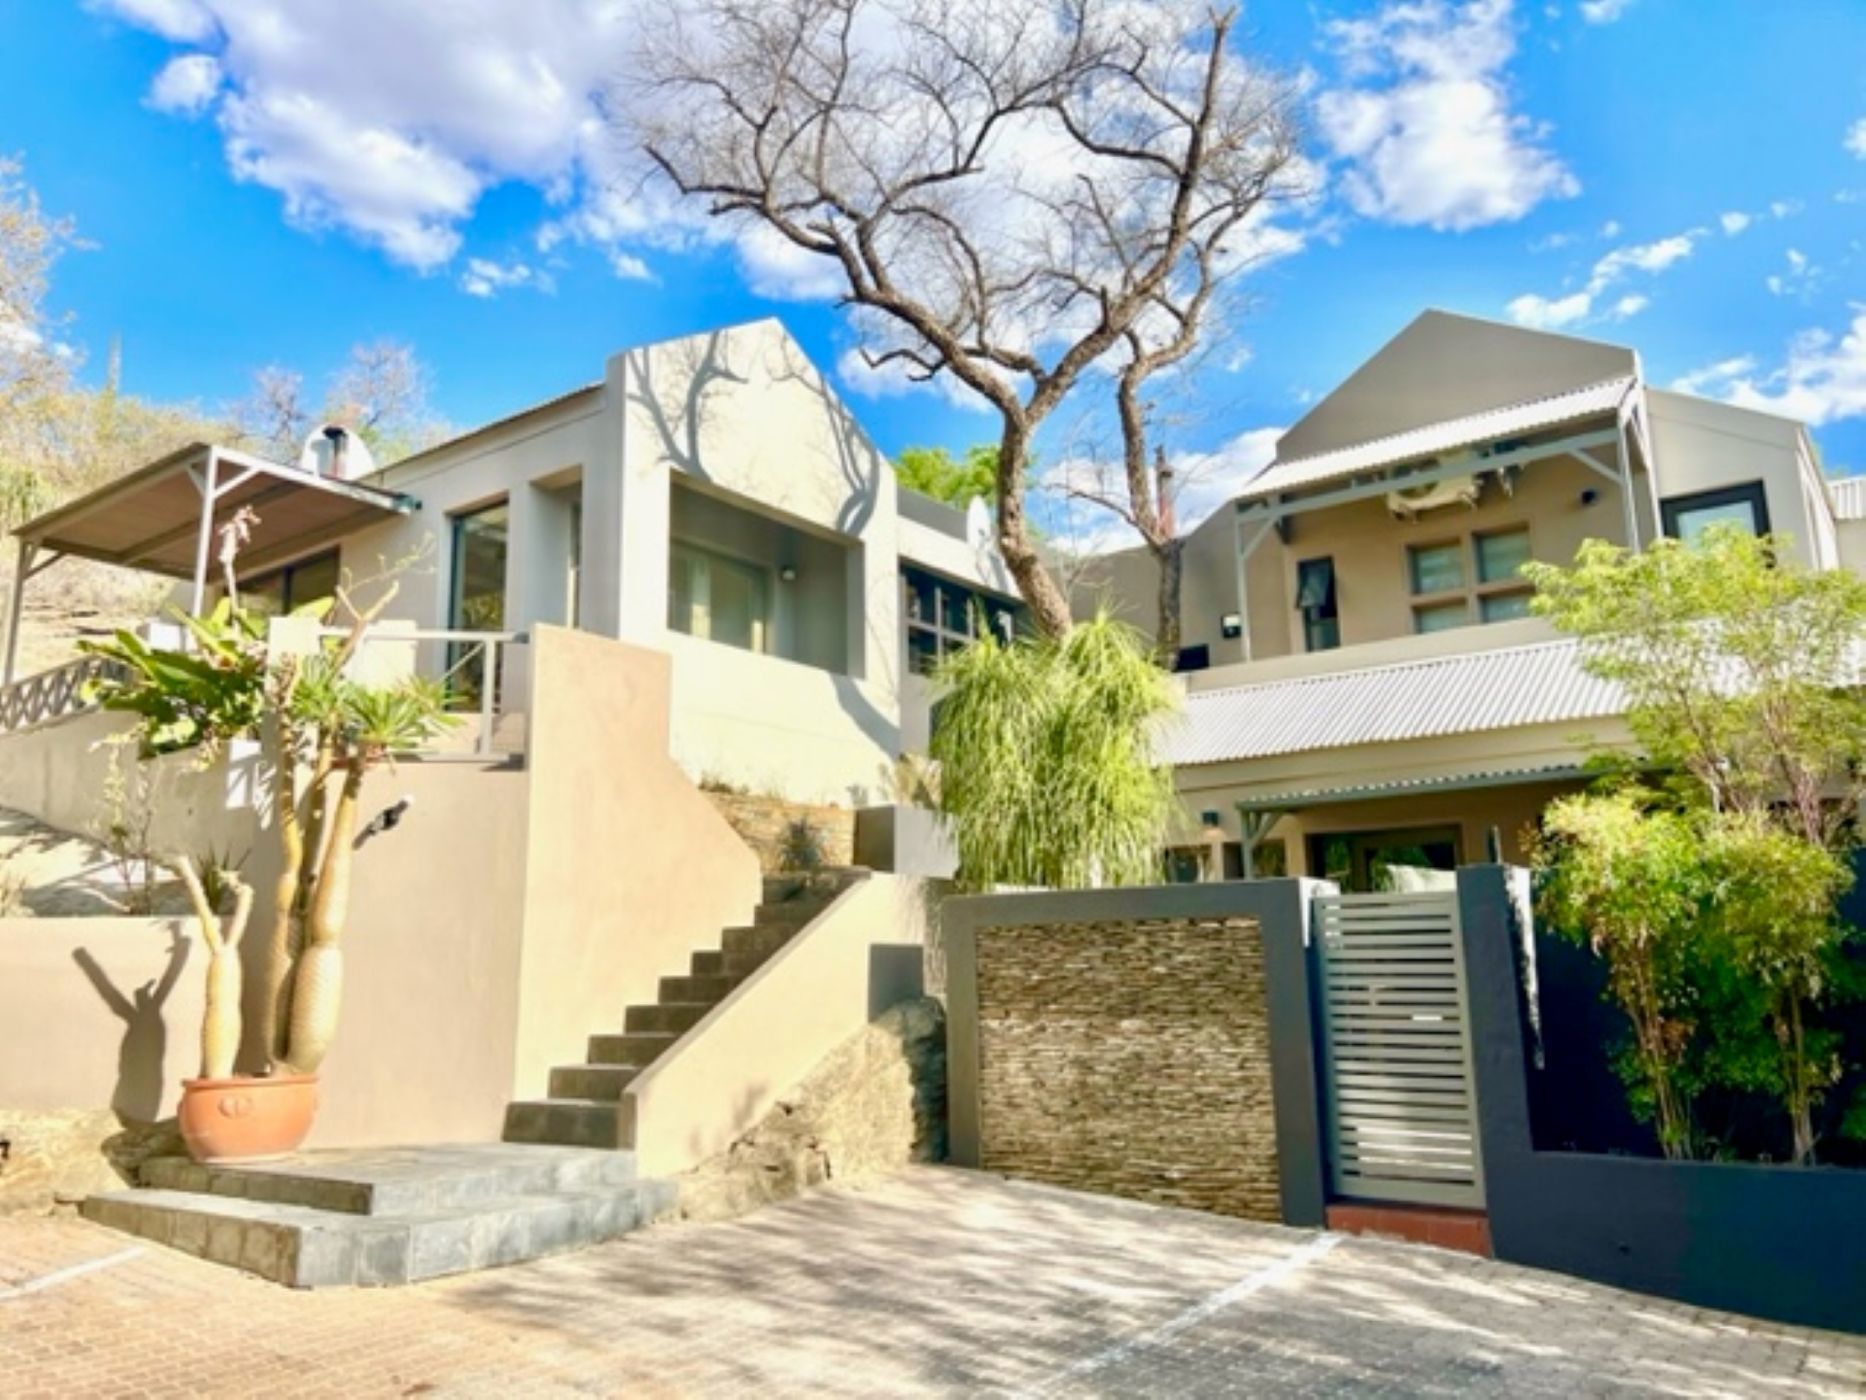 5 bedroom double-storey house for sale in Klein Windhoek (Namibia)